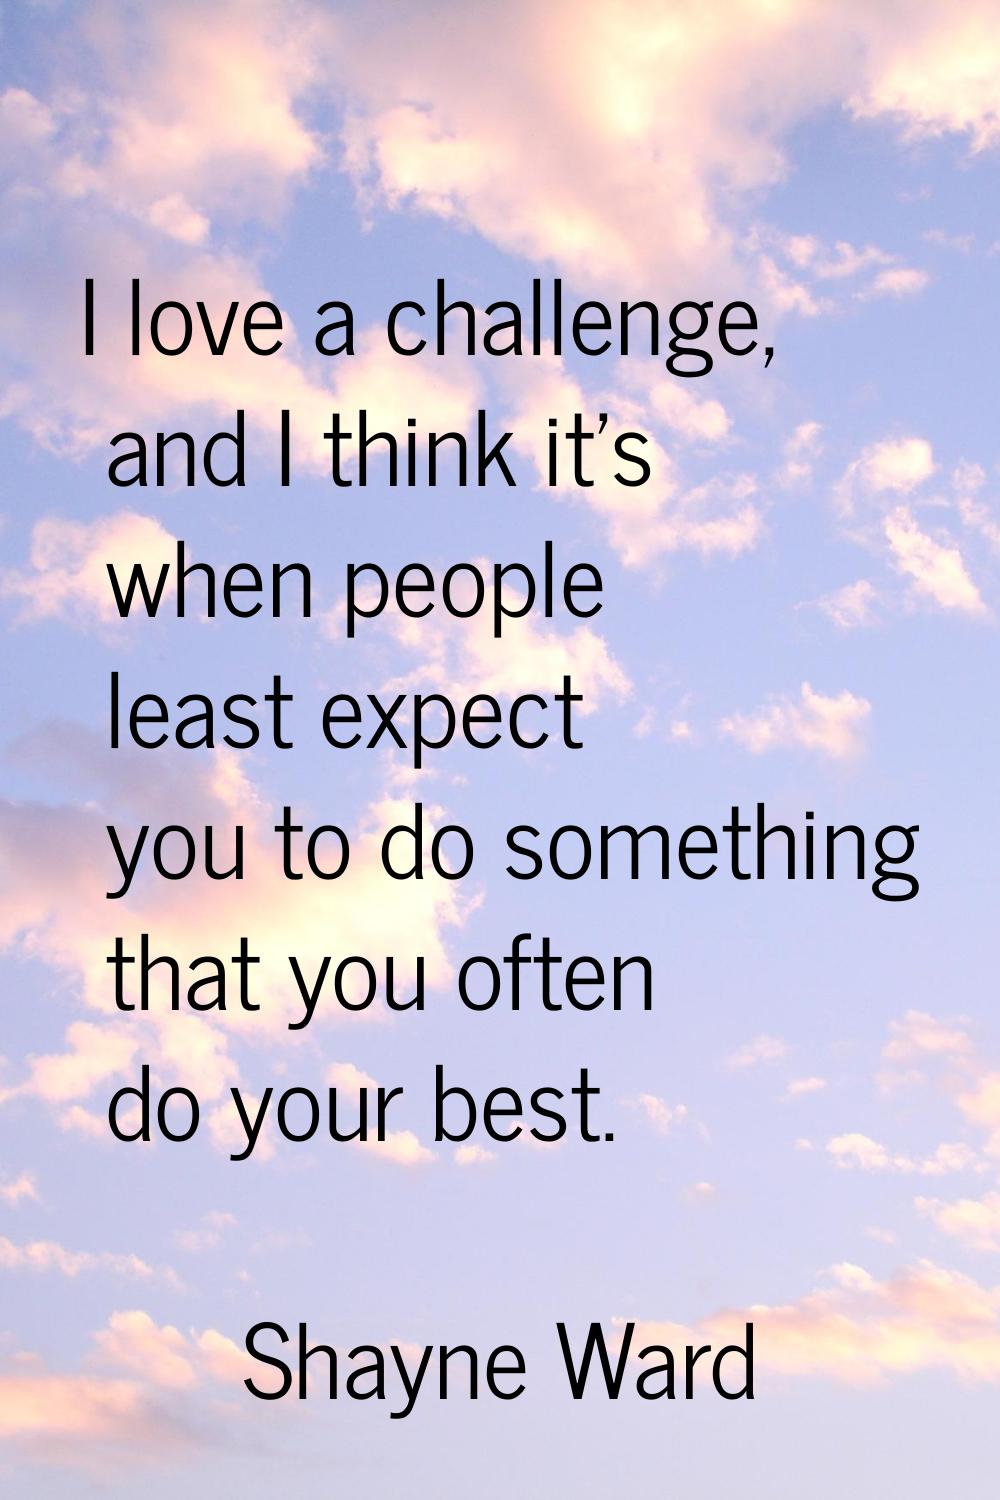 I love a challenge, and I think it's when people least expect you to do something that you often do